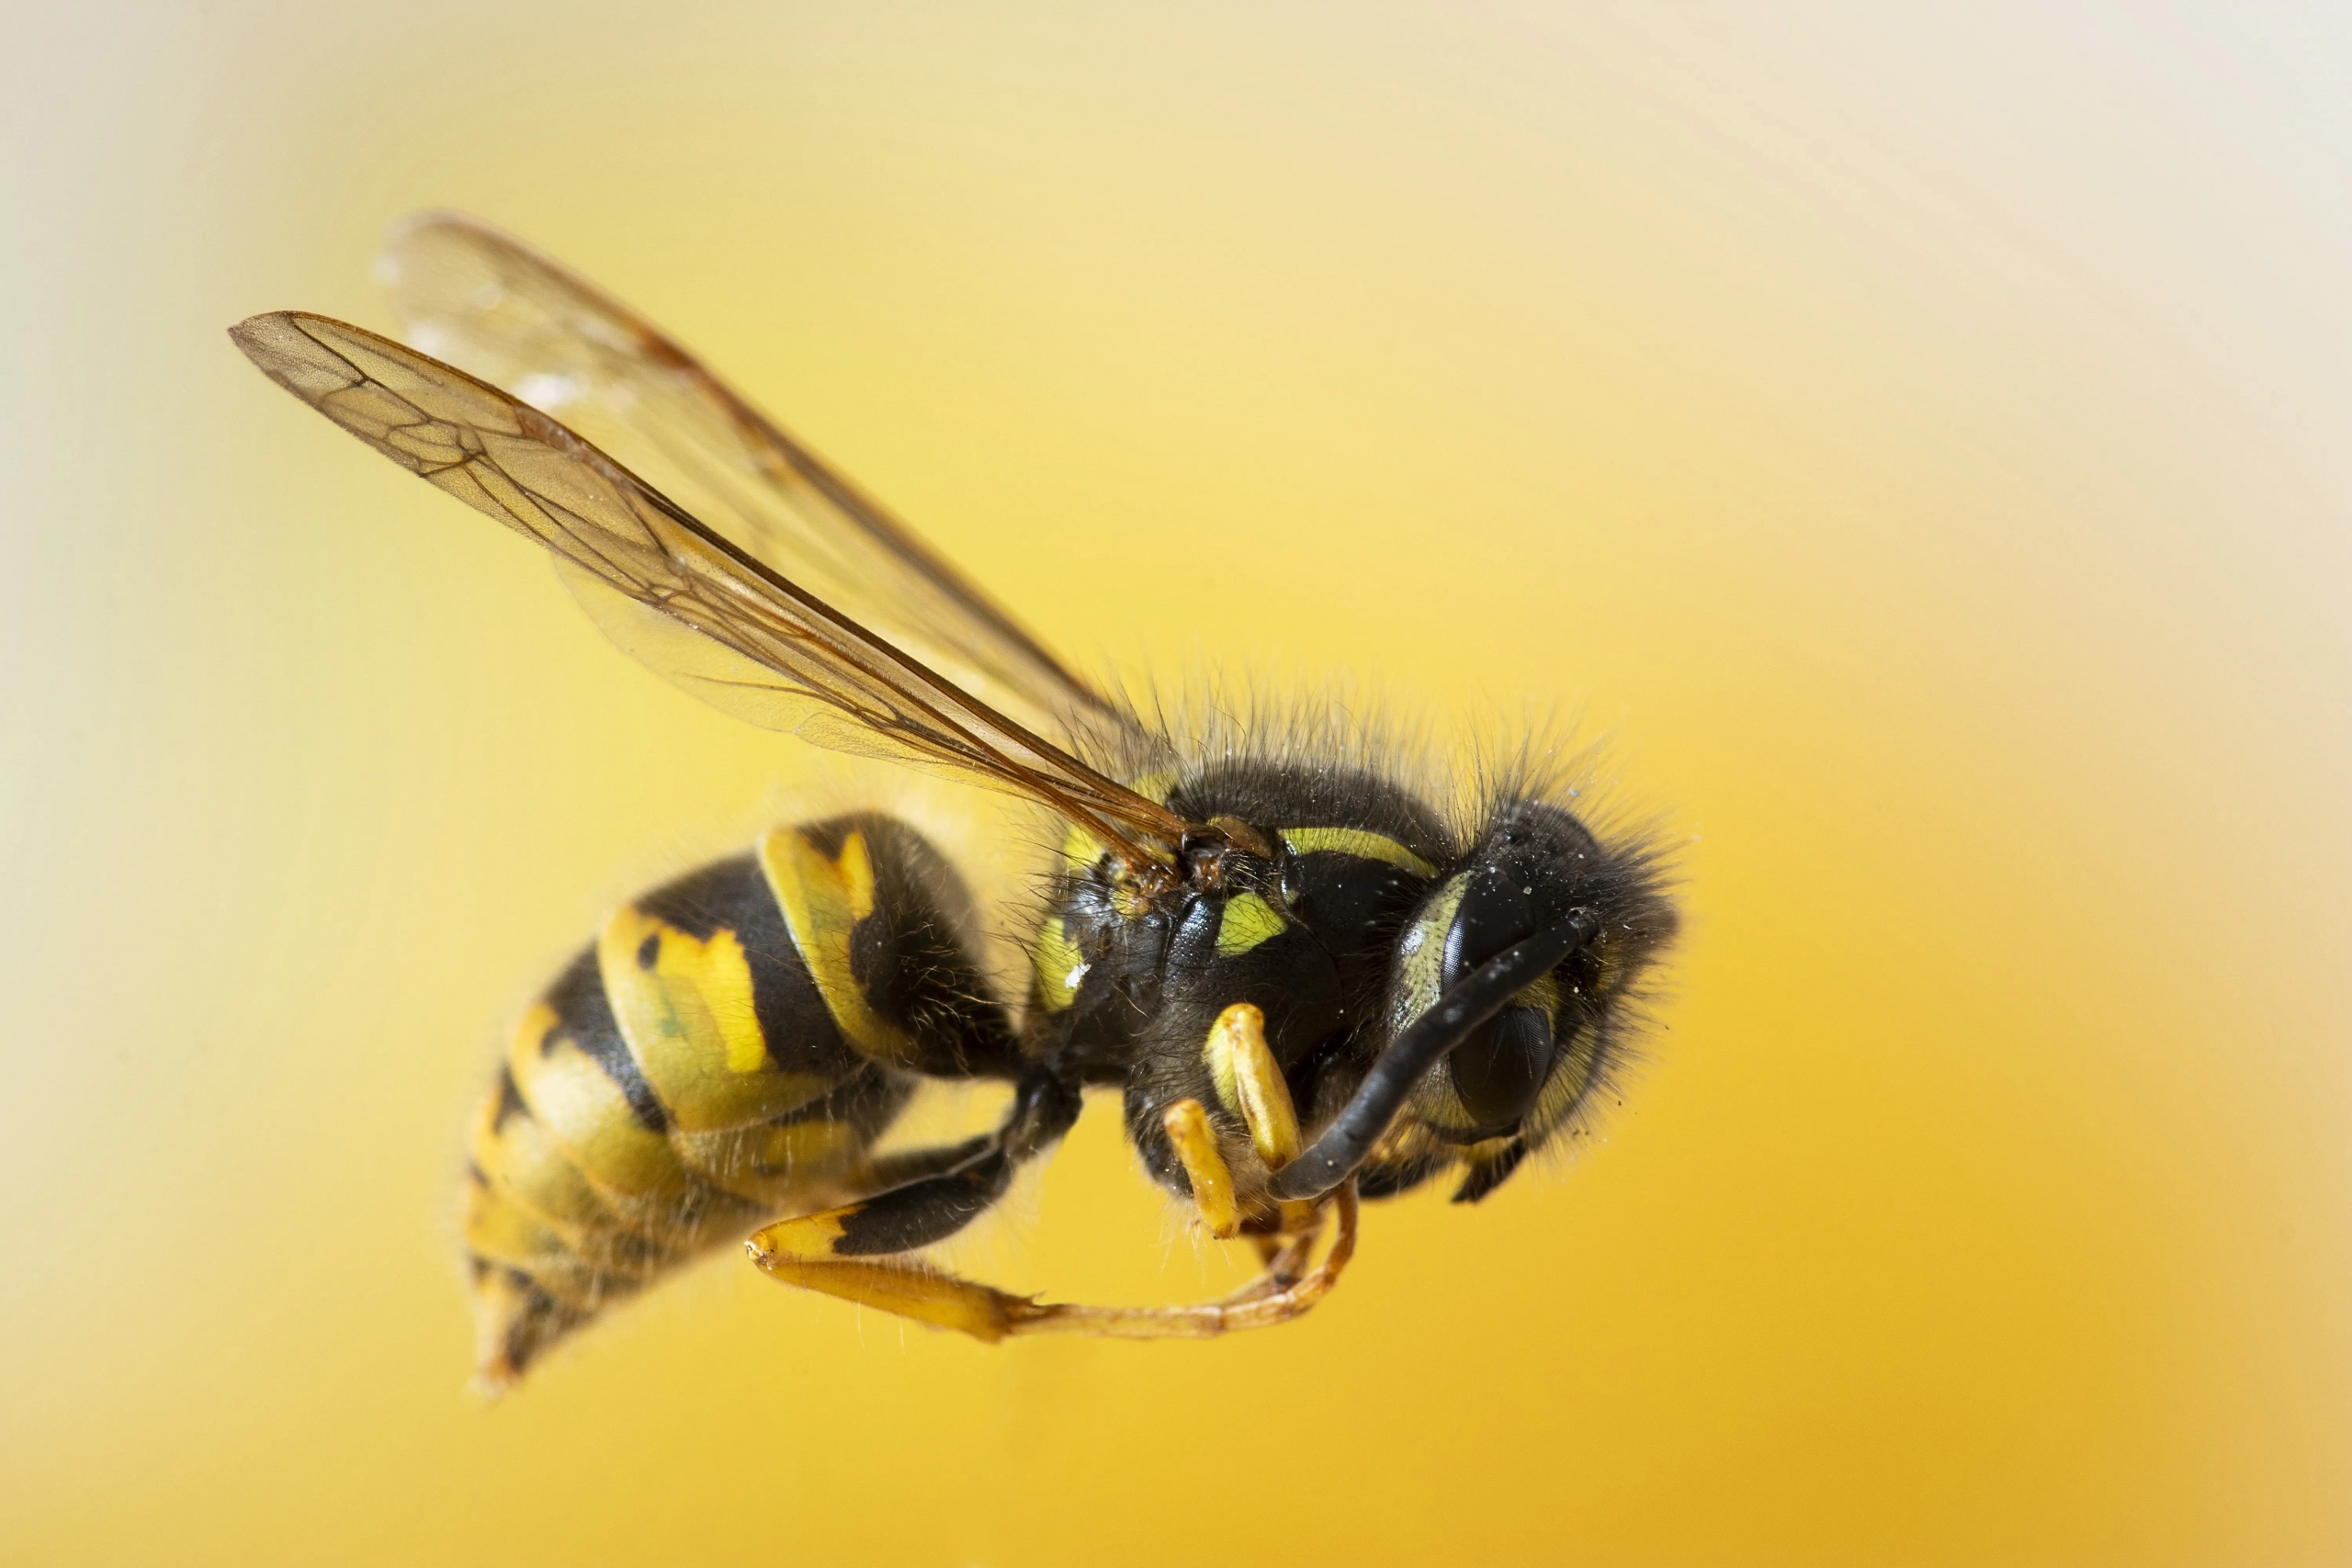 Close-up image of a yellow bee